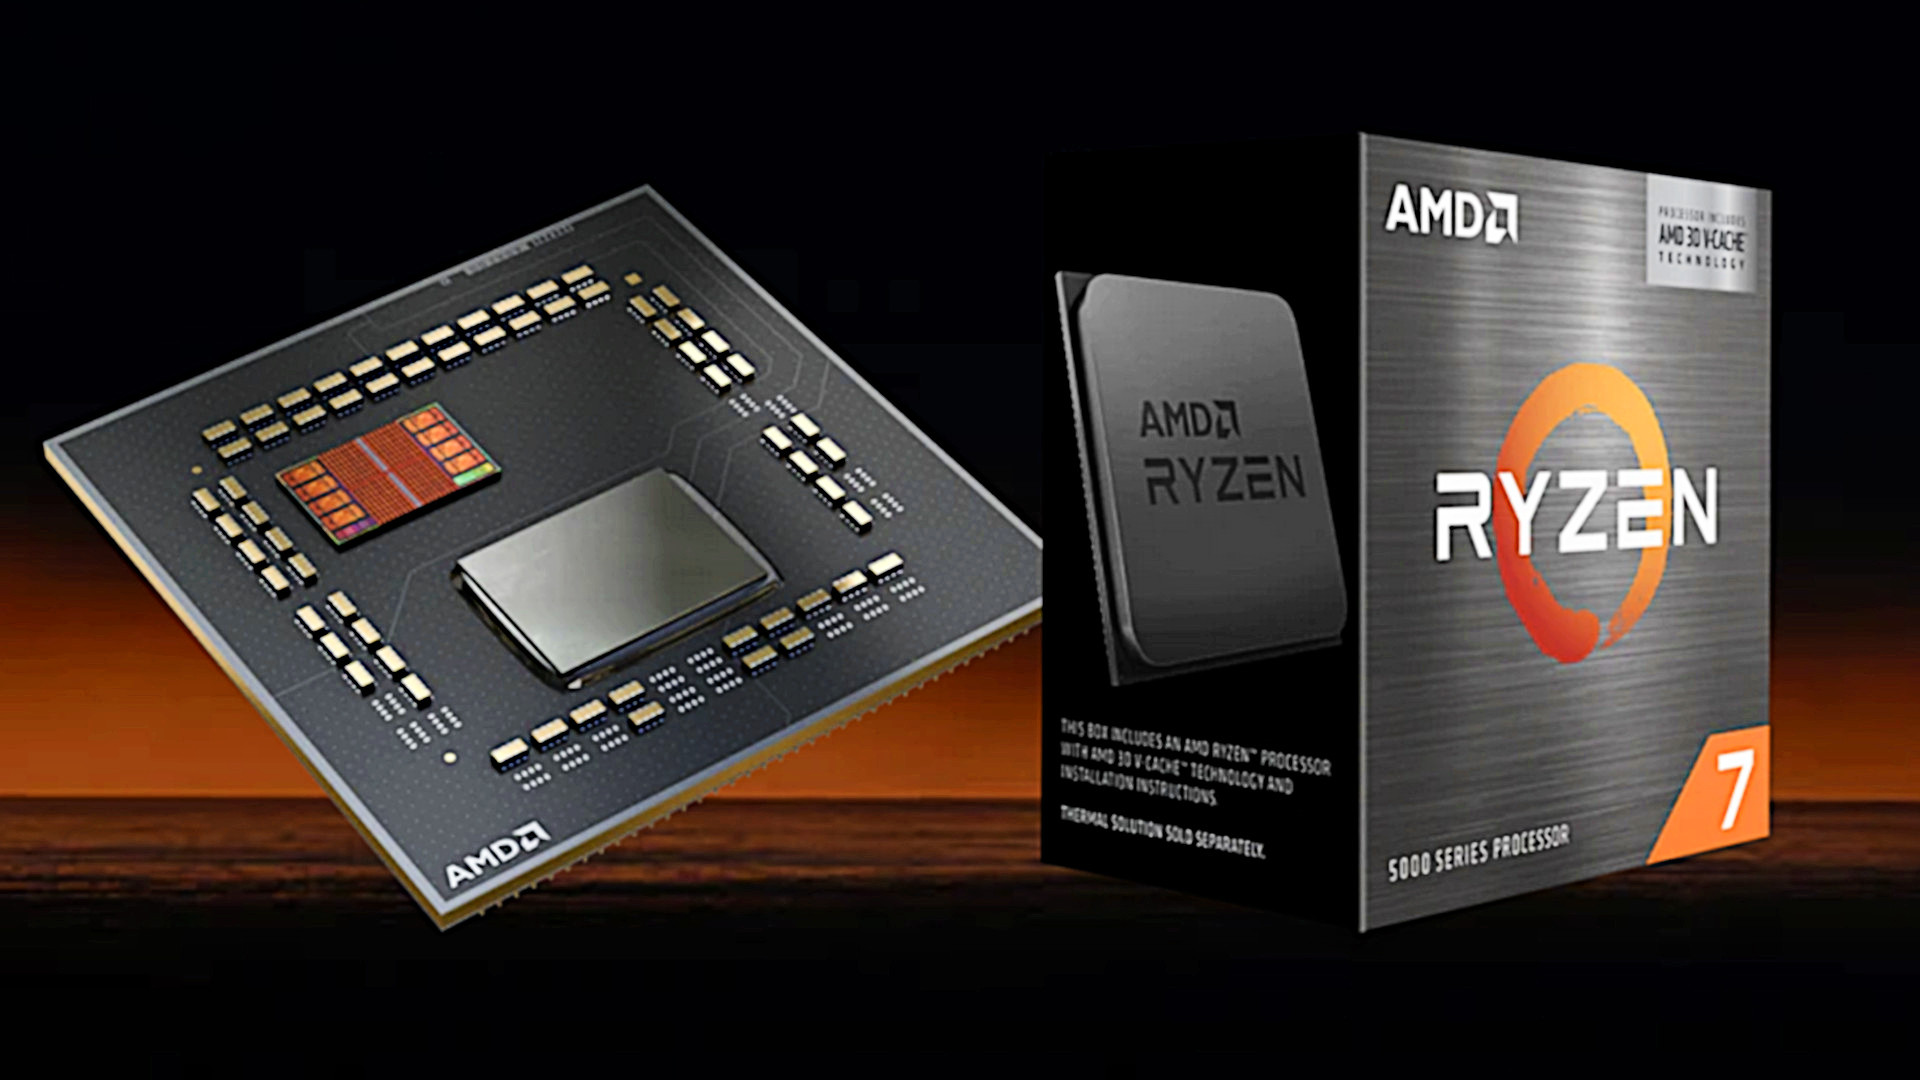 AMD Ryzen 7 5800X3D gaming CPU stock sells out at launch